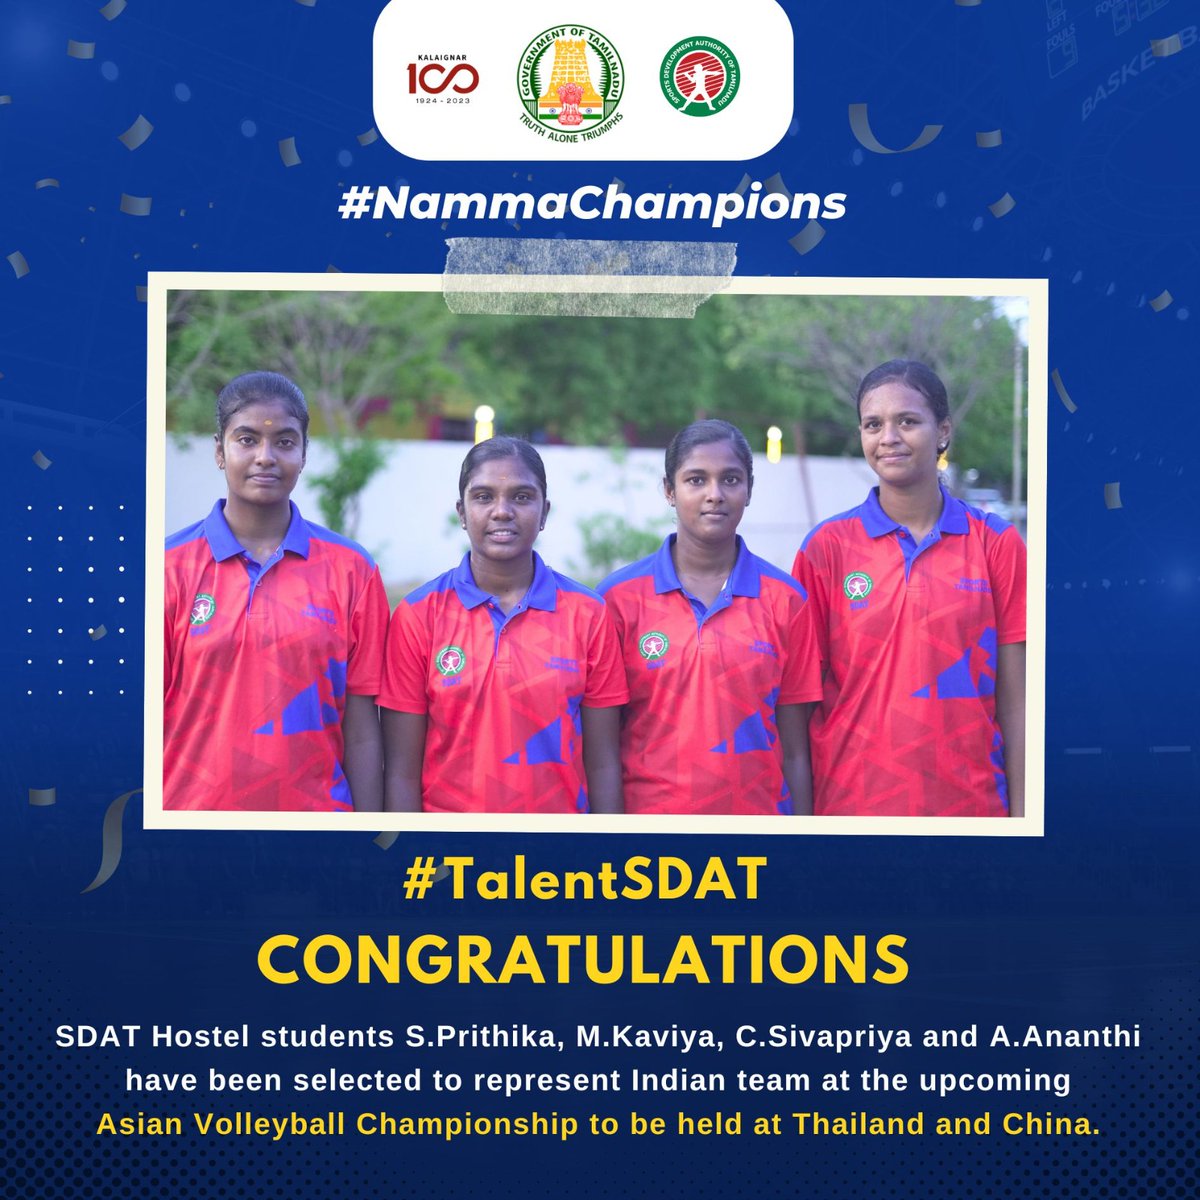 Congratulations to SDAT Hostel Students who have been selected to represent Indian team at the upcoming Asian Volleyball Championship to be held at Thailand and China.
@CMOTamilnadu @Udhaystalin
@TNDIPRNEWS

 #SportsTN #NammaChampions #TalentSDAT